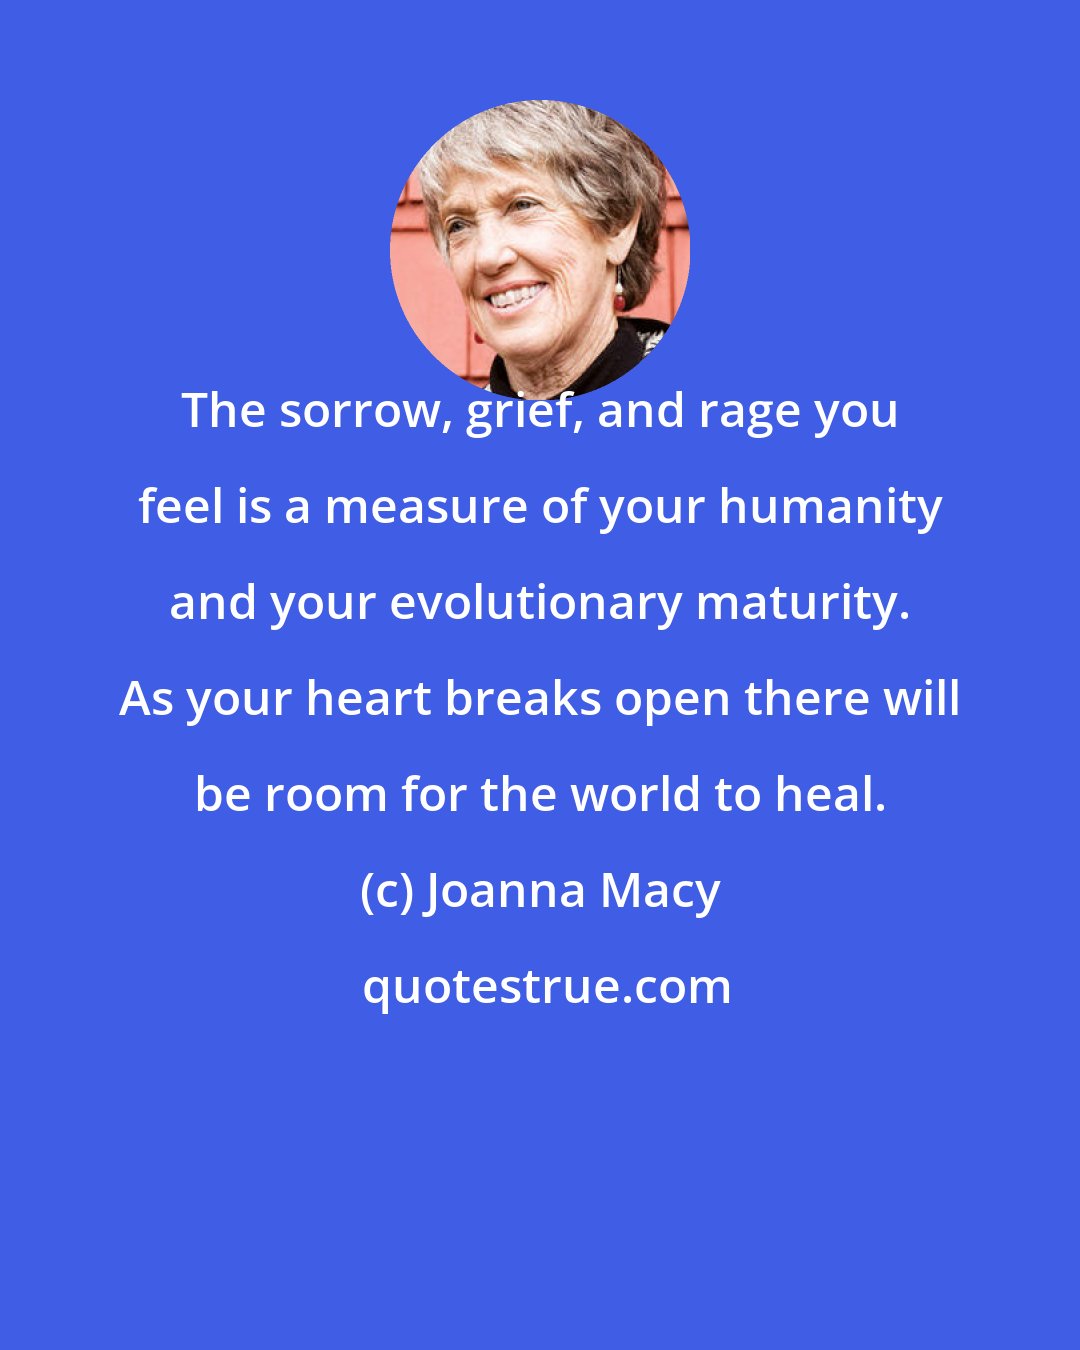 Joanna Macy: The sorrow, grief, and rage you feel is a measure of your humanity and your evolutionary maturity. As your heart breaks open there will be room for the world to heal.